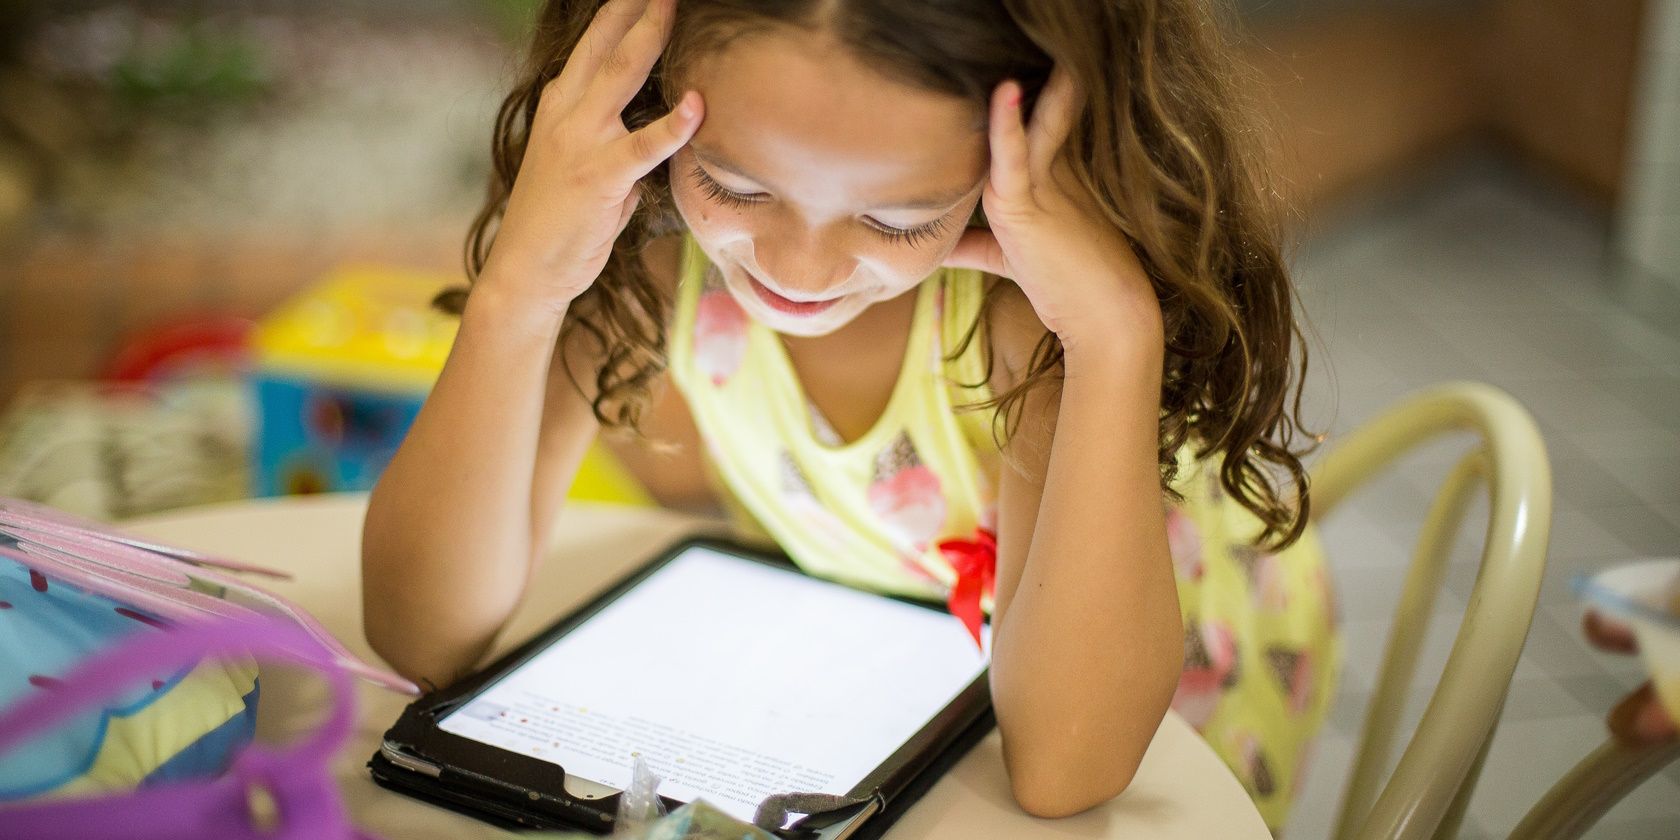 The 8 Best Types of Smart Gadgets to Help Kids Stay Happy and Healthy